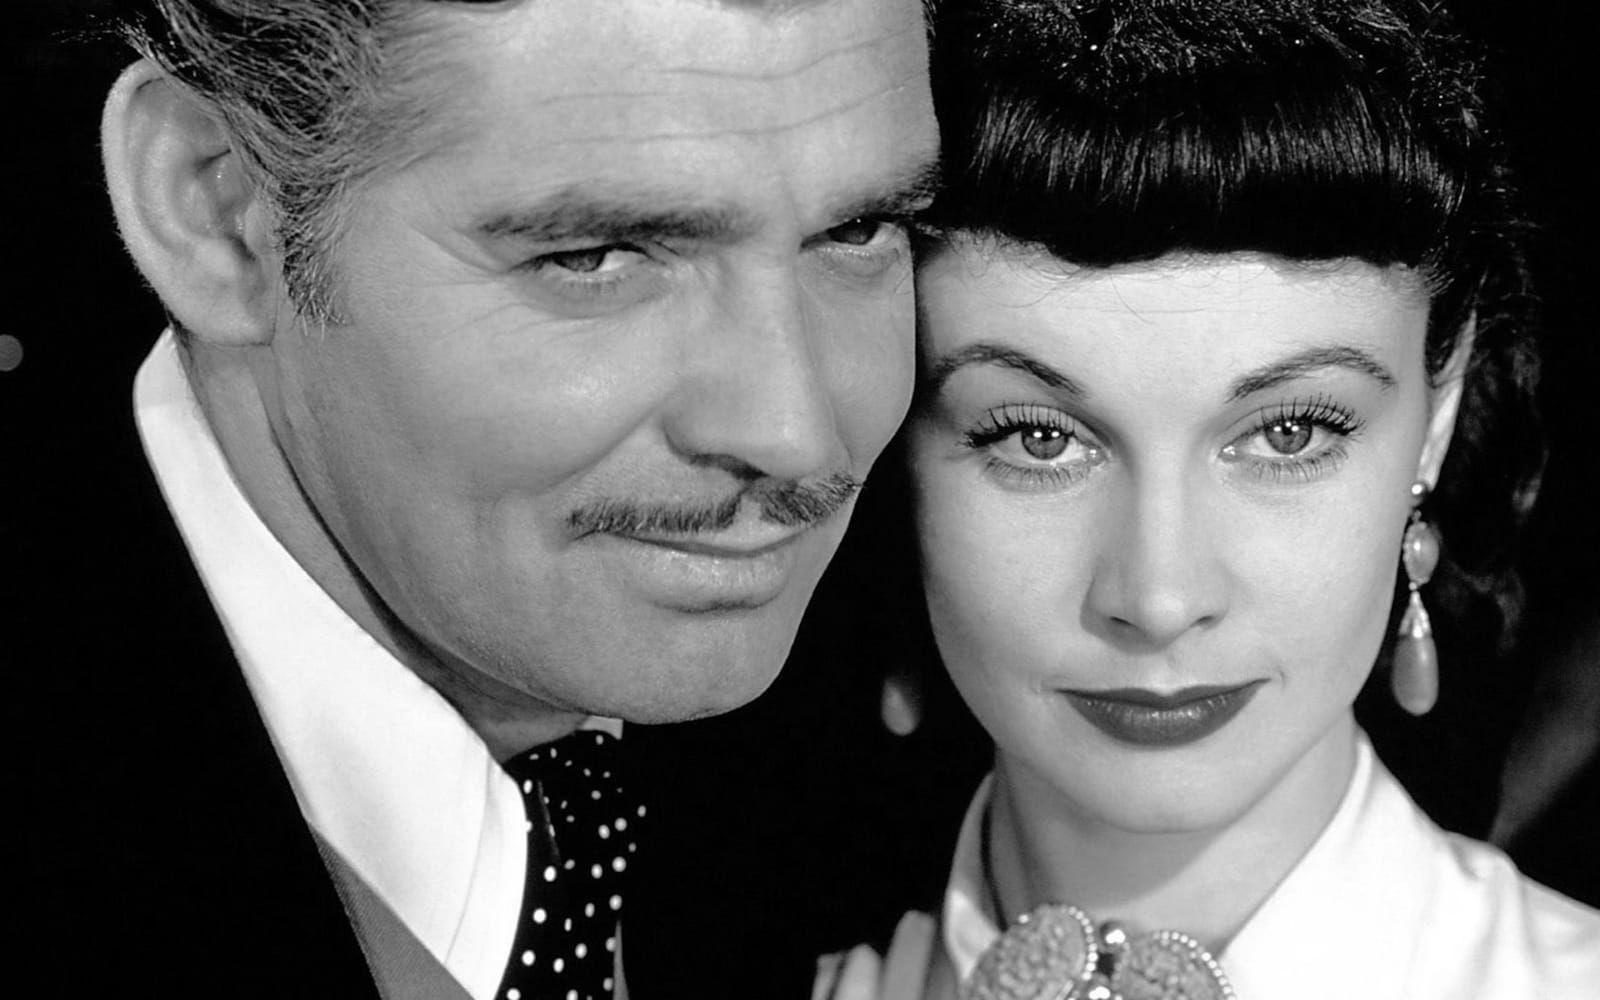 “No, I don’t think I will kiss you, although you need kissing, badly. That’s what’s wrong with you. You should be kissed and often, and by someone who knows how.” - Rhett (Clark Gable) till Scarlett (Vivien Leigh) i ”Borta med vinden” från 1939. Foto: Stella Pictures